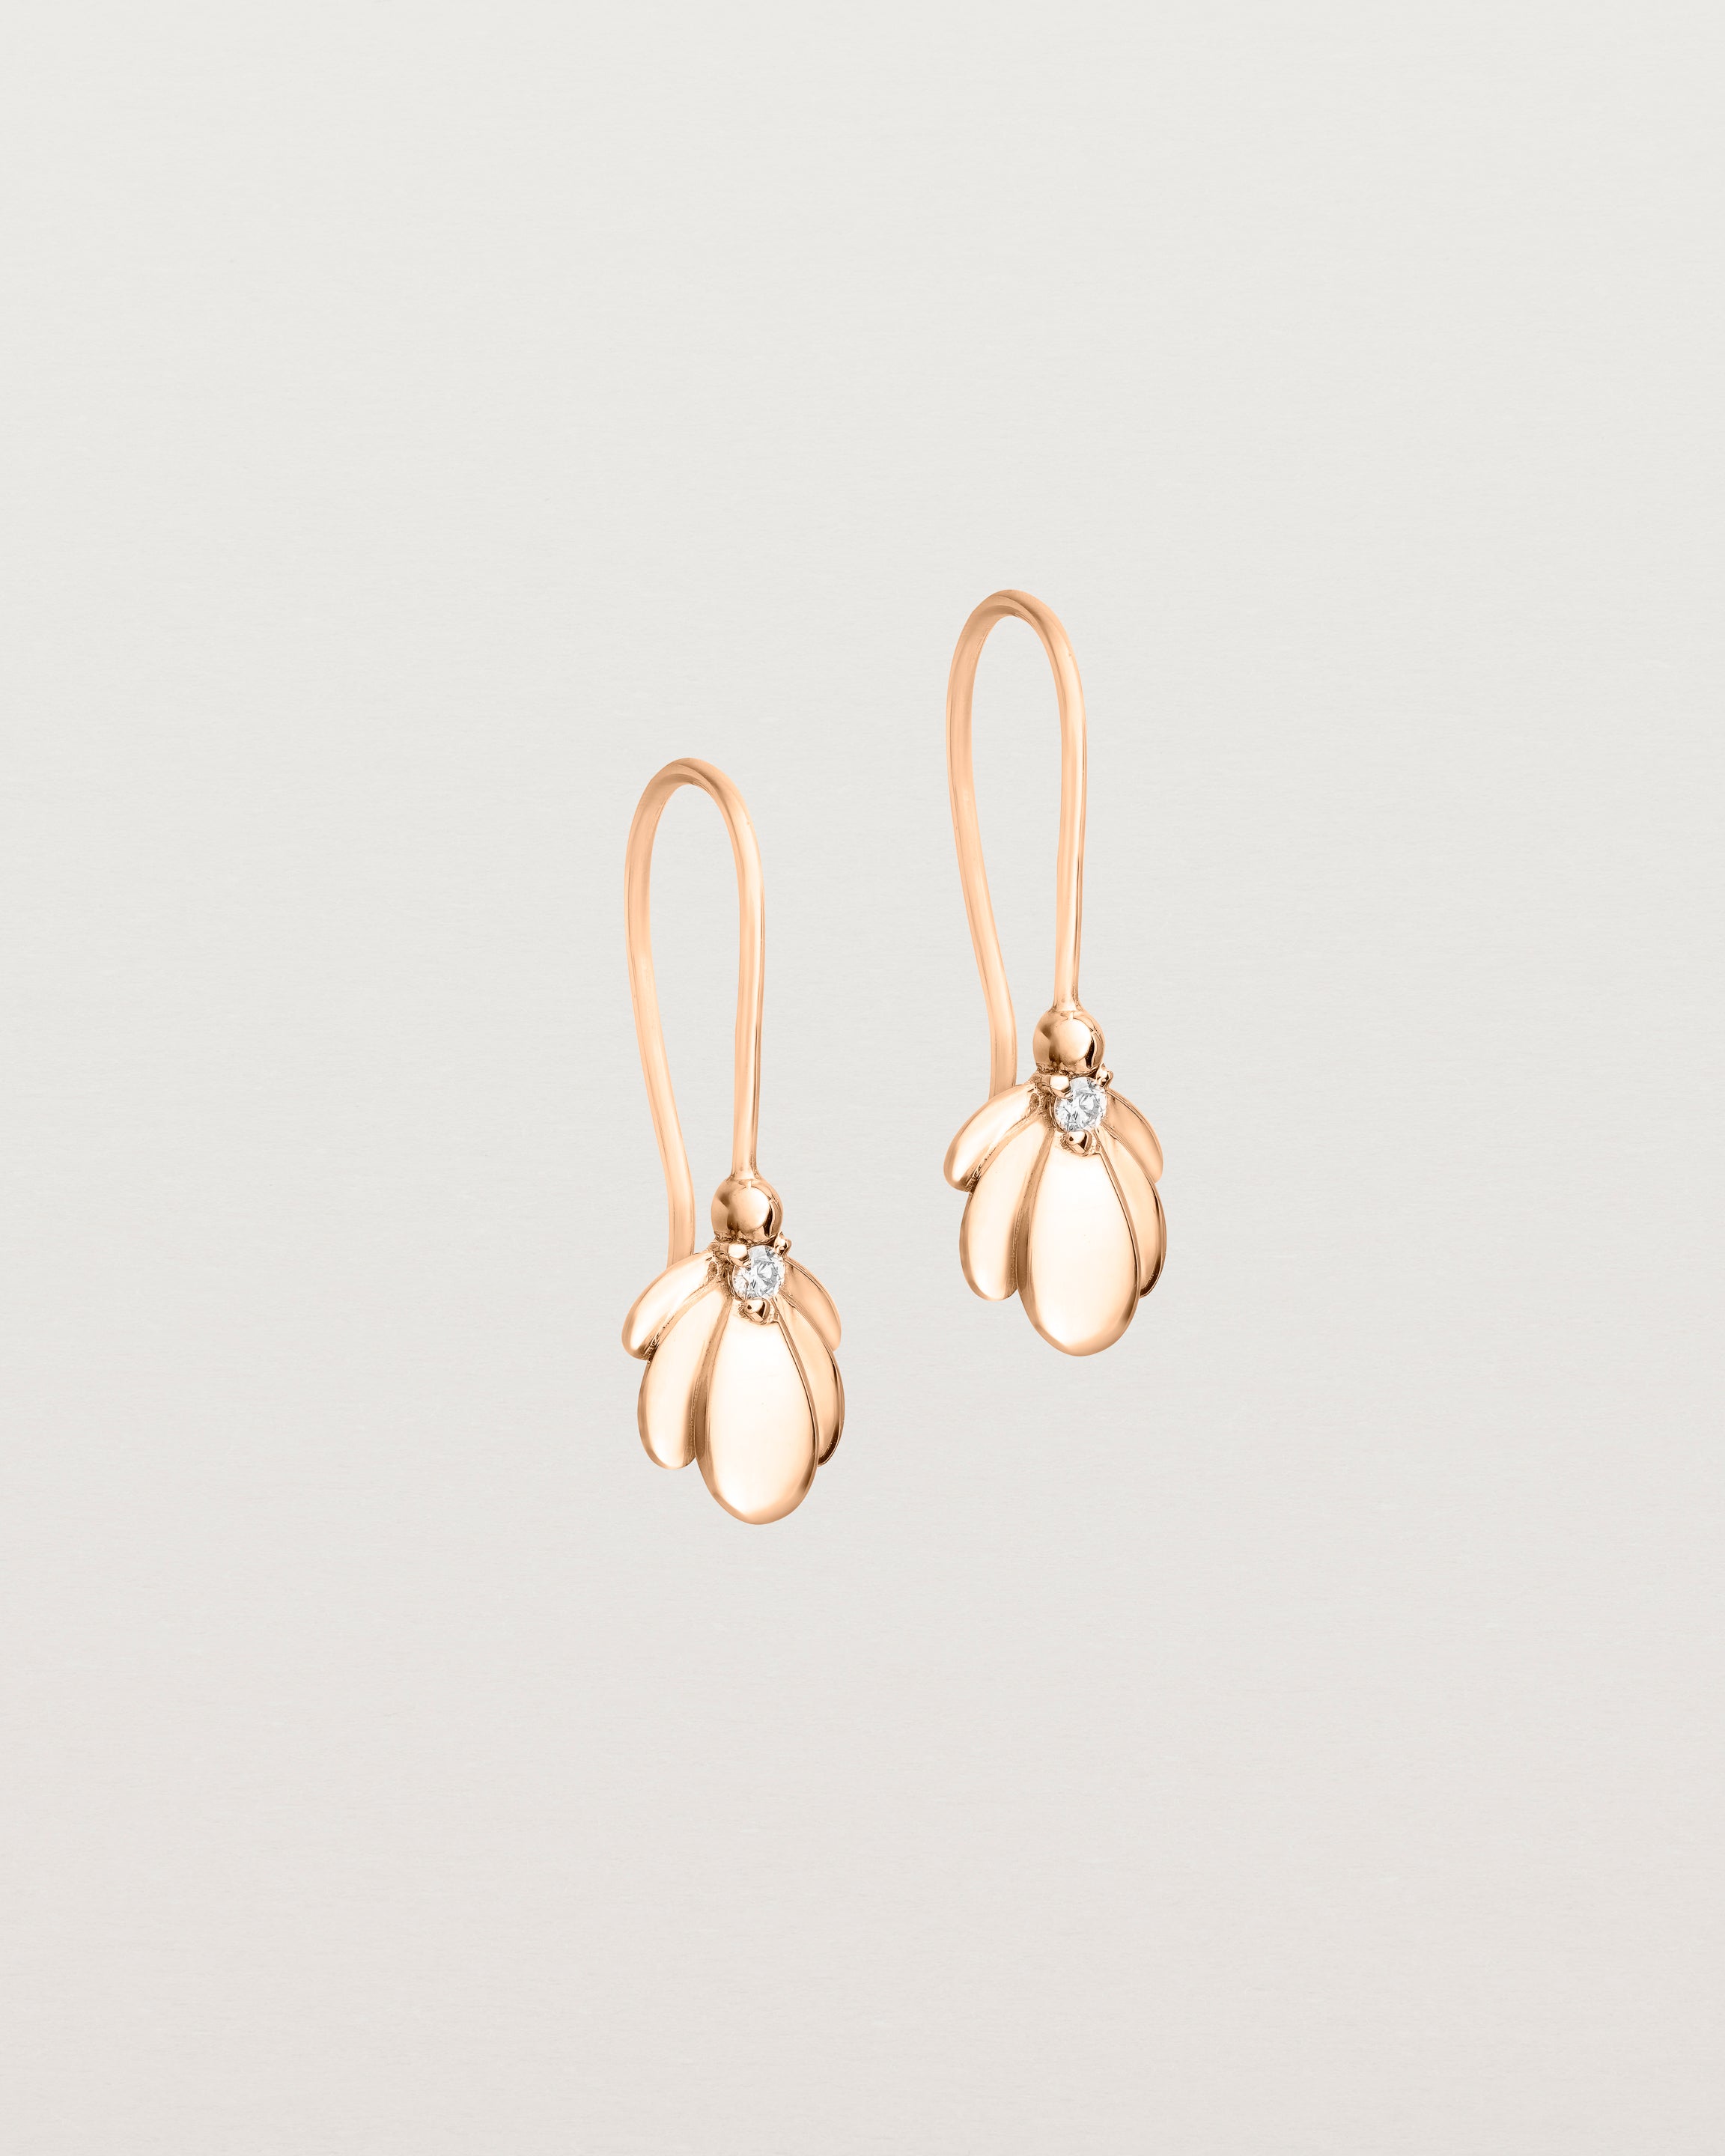 Angled view of the Aeris Earrings | Diamond | Rose Gold.